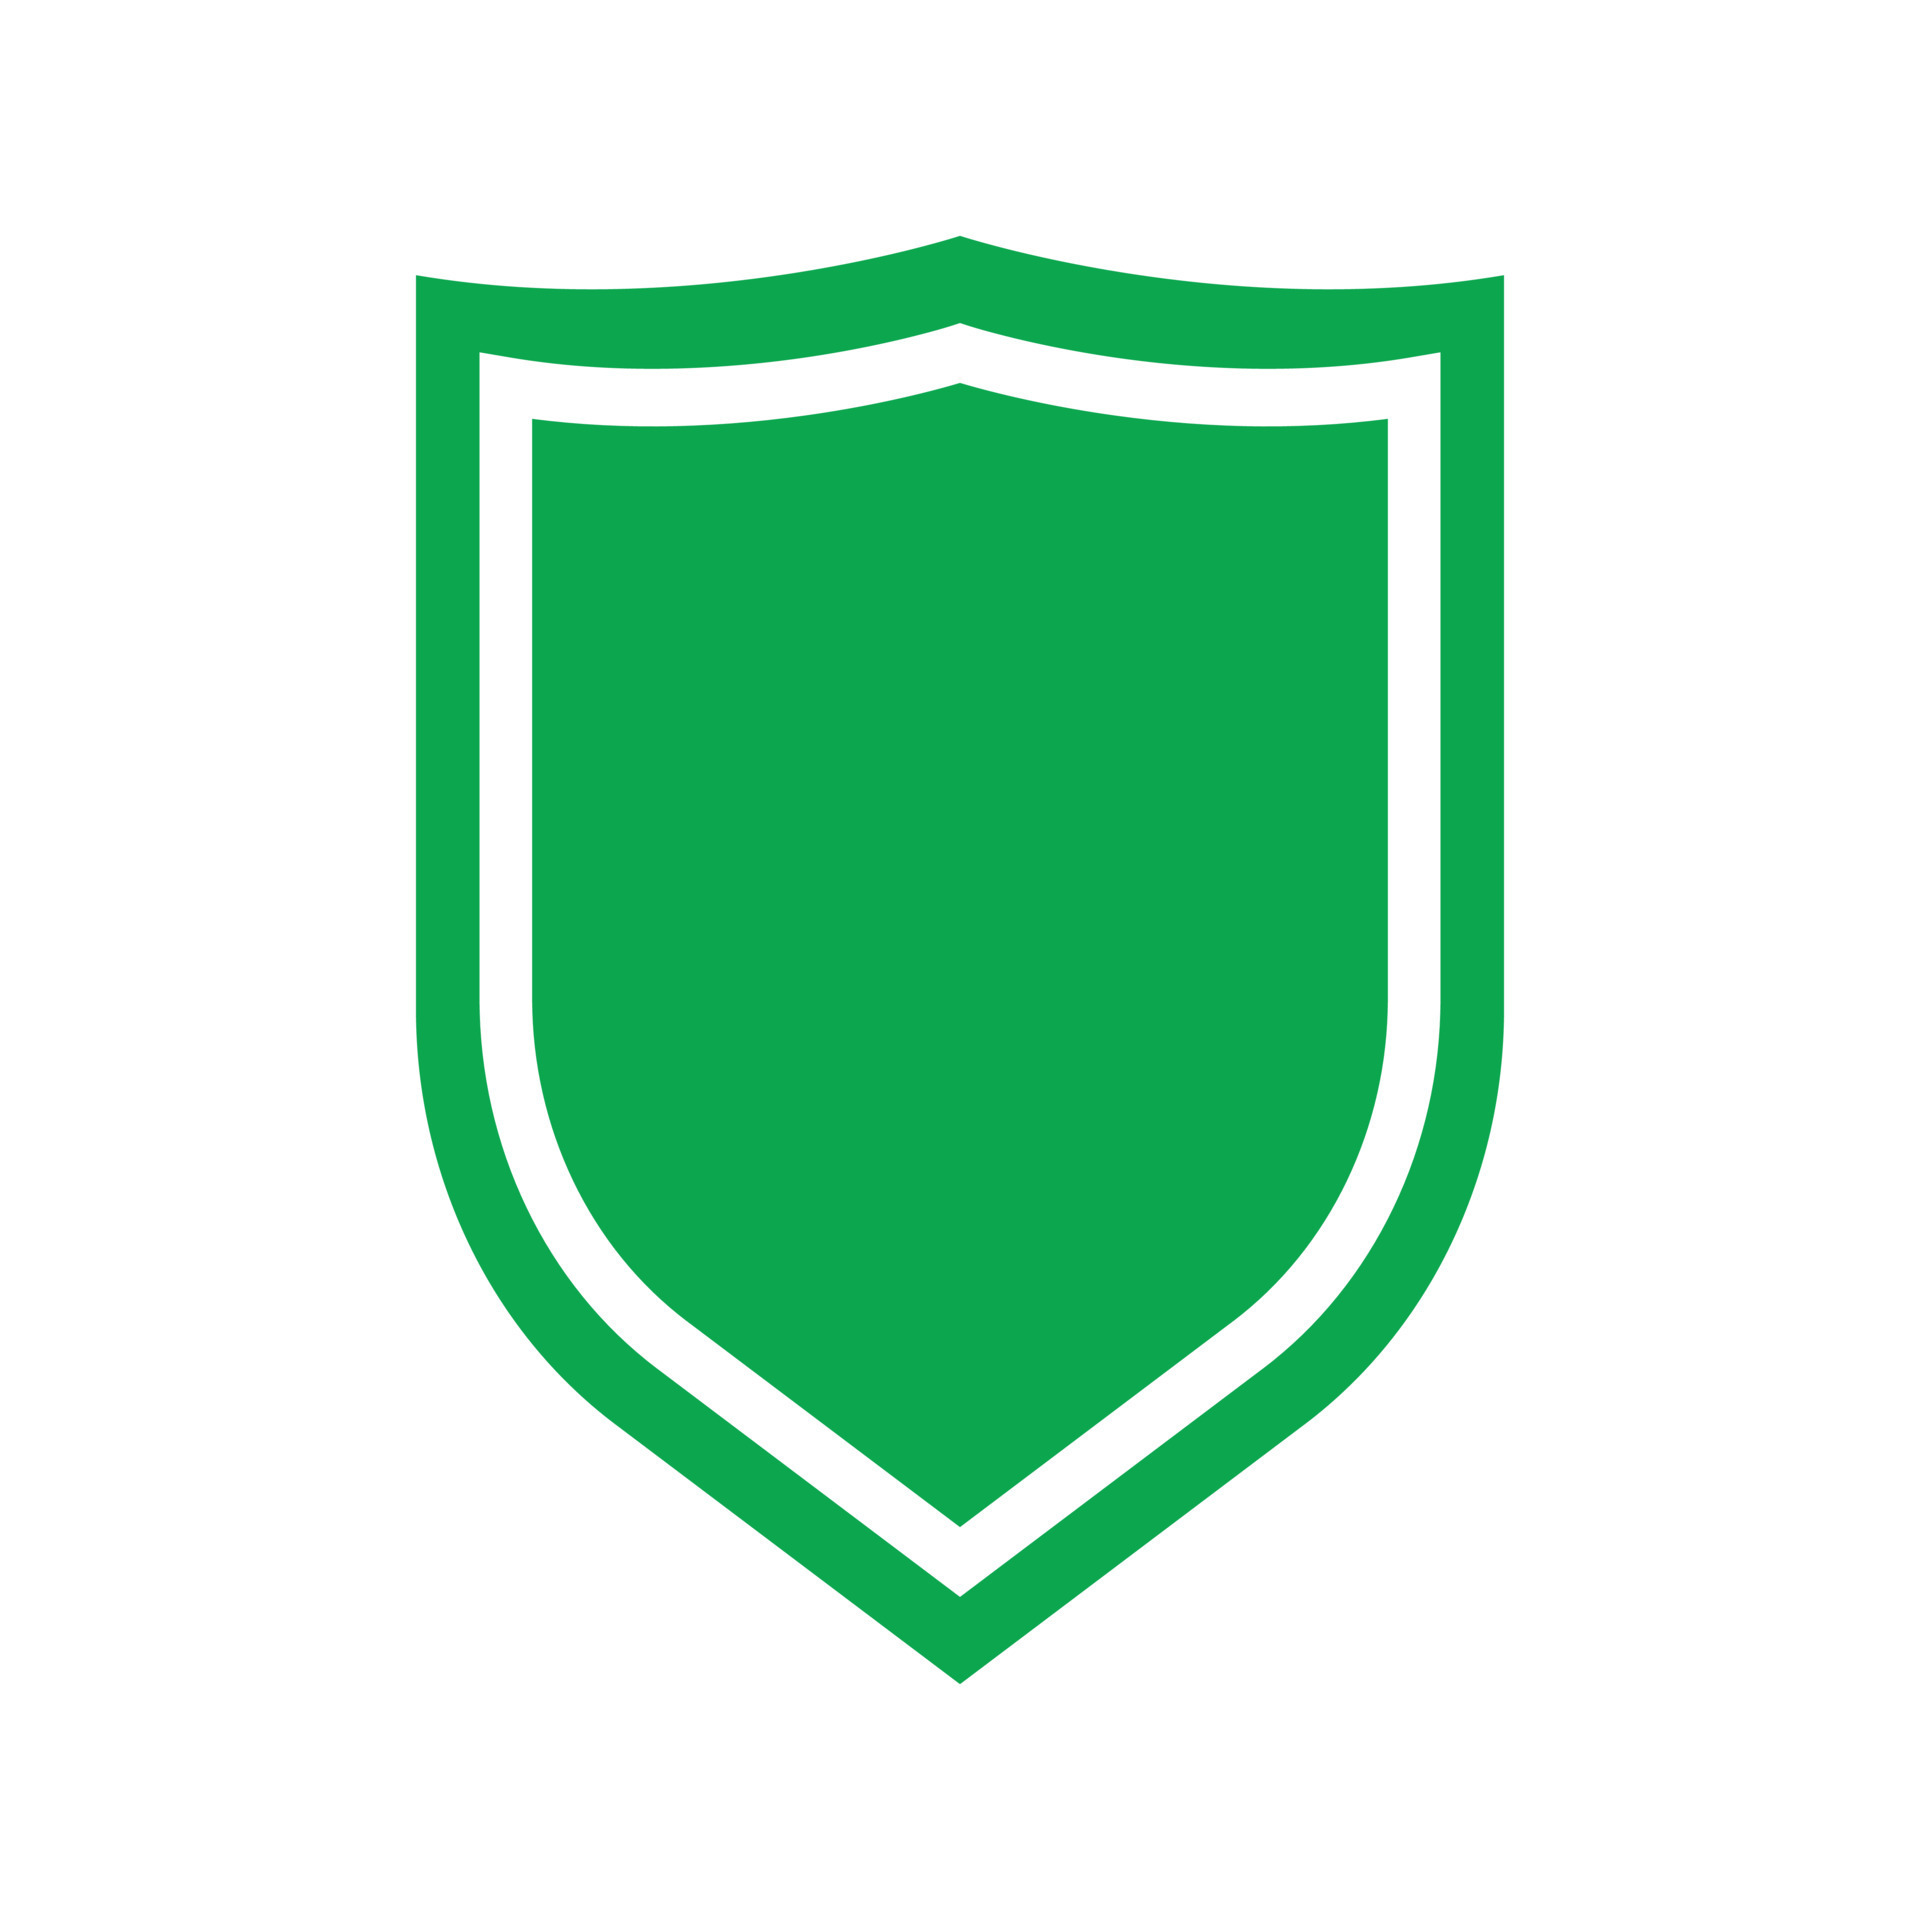 Eps10 Green Vector Shield Solid Icon Or Logo In Simple Flat Trendy